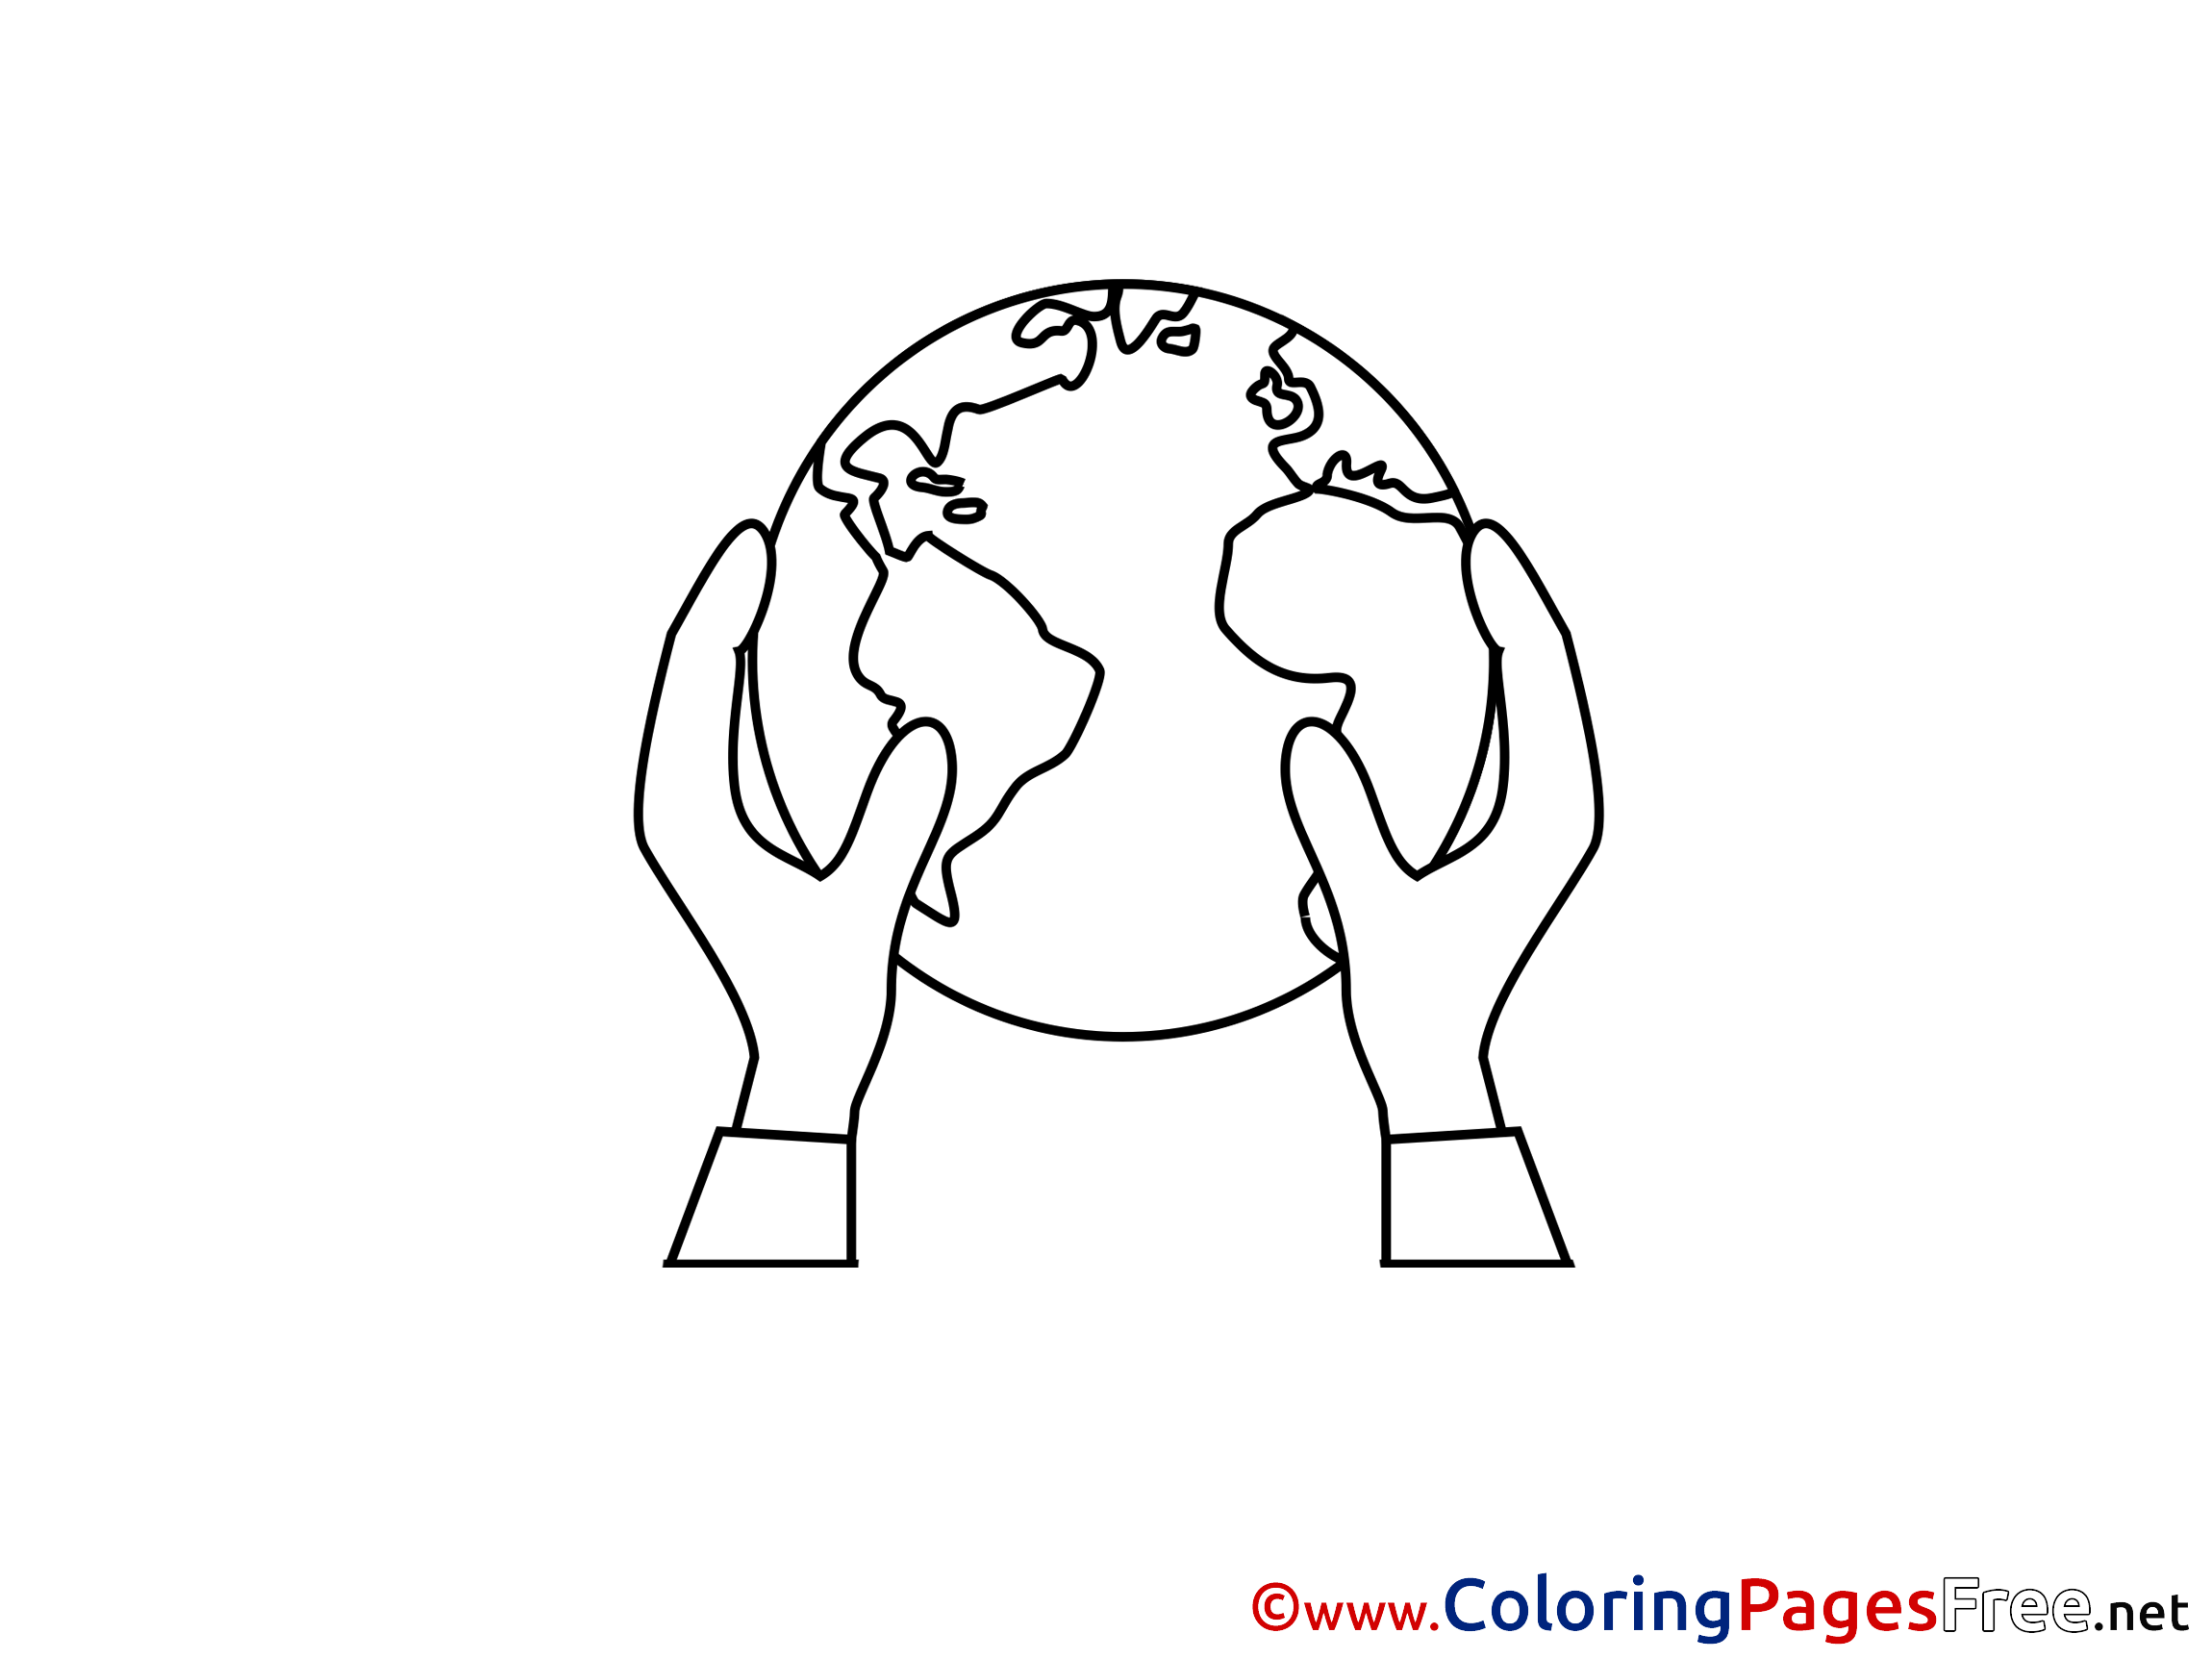 planet-earth-printable-coloring-sheets-download